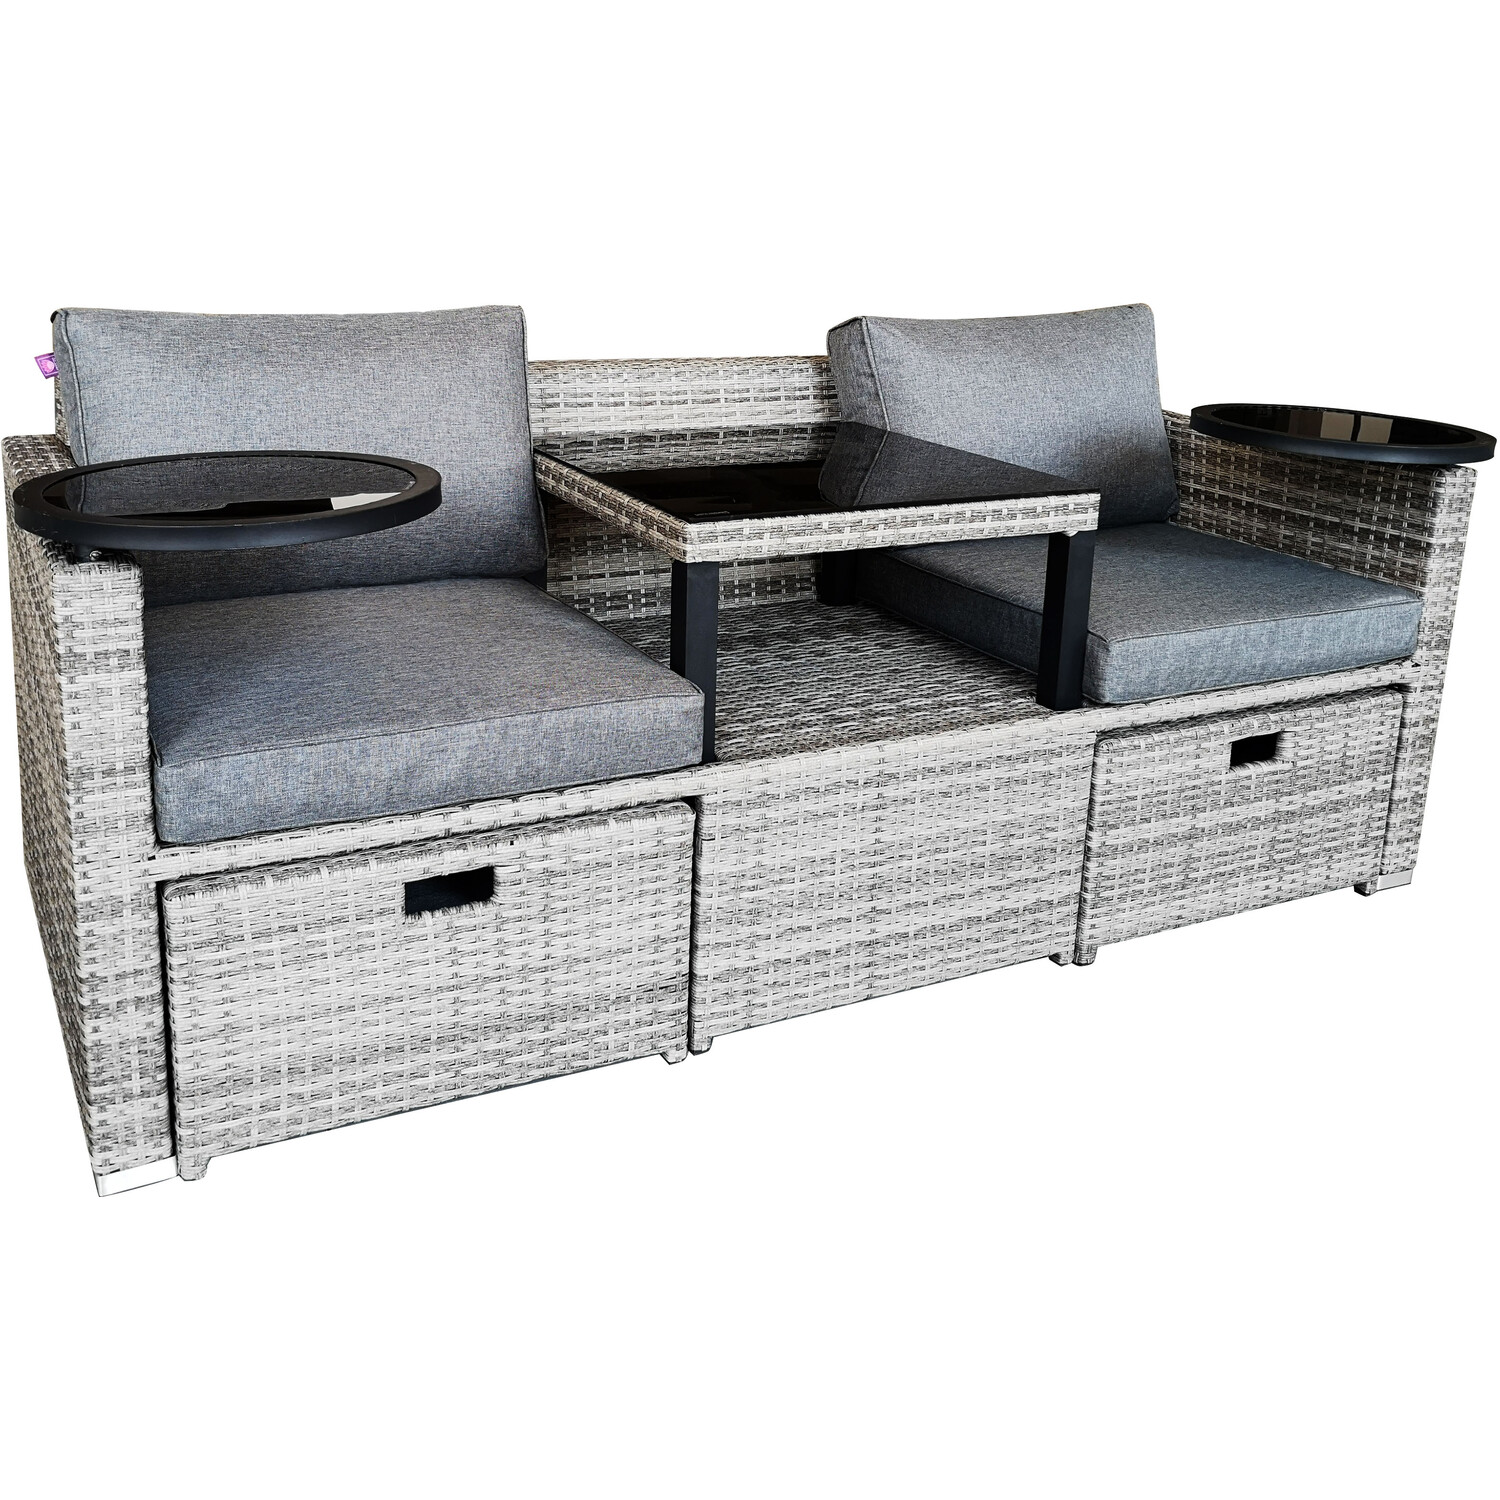 Malay Deluxe Malay New Hampshire 2 Seater Natural Transformer Patio Set Image 5